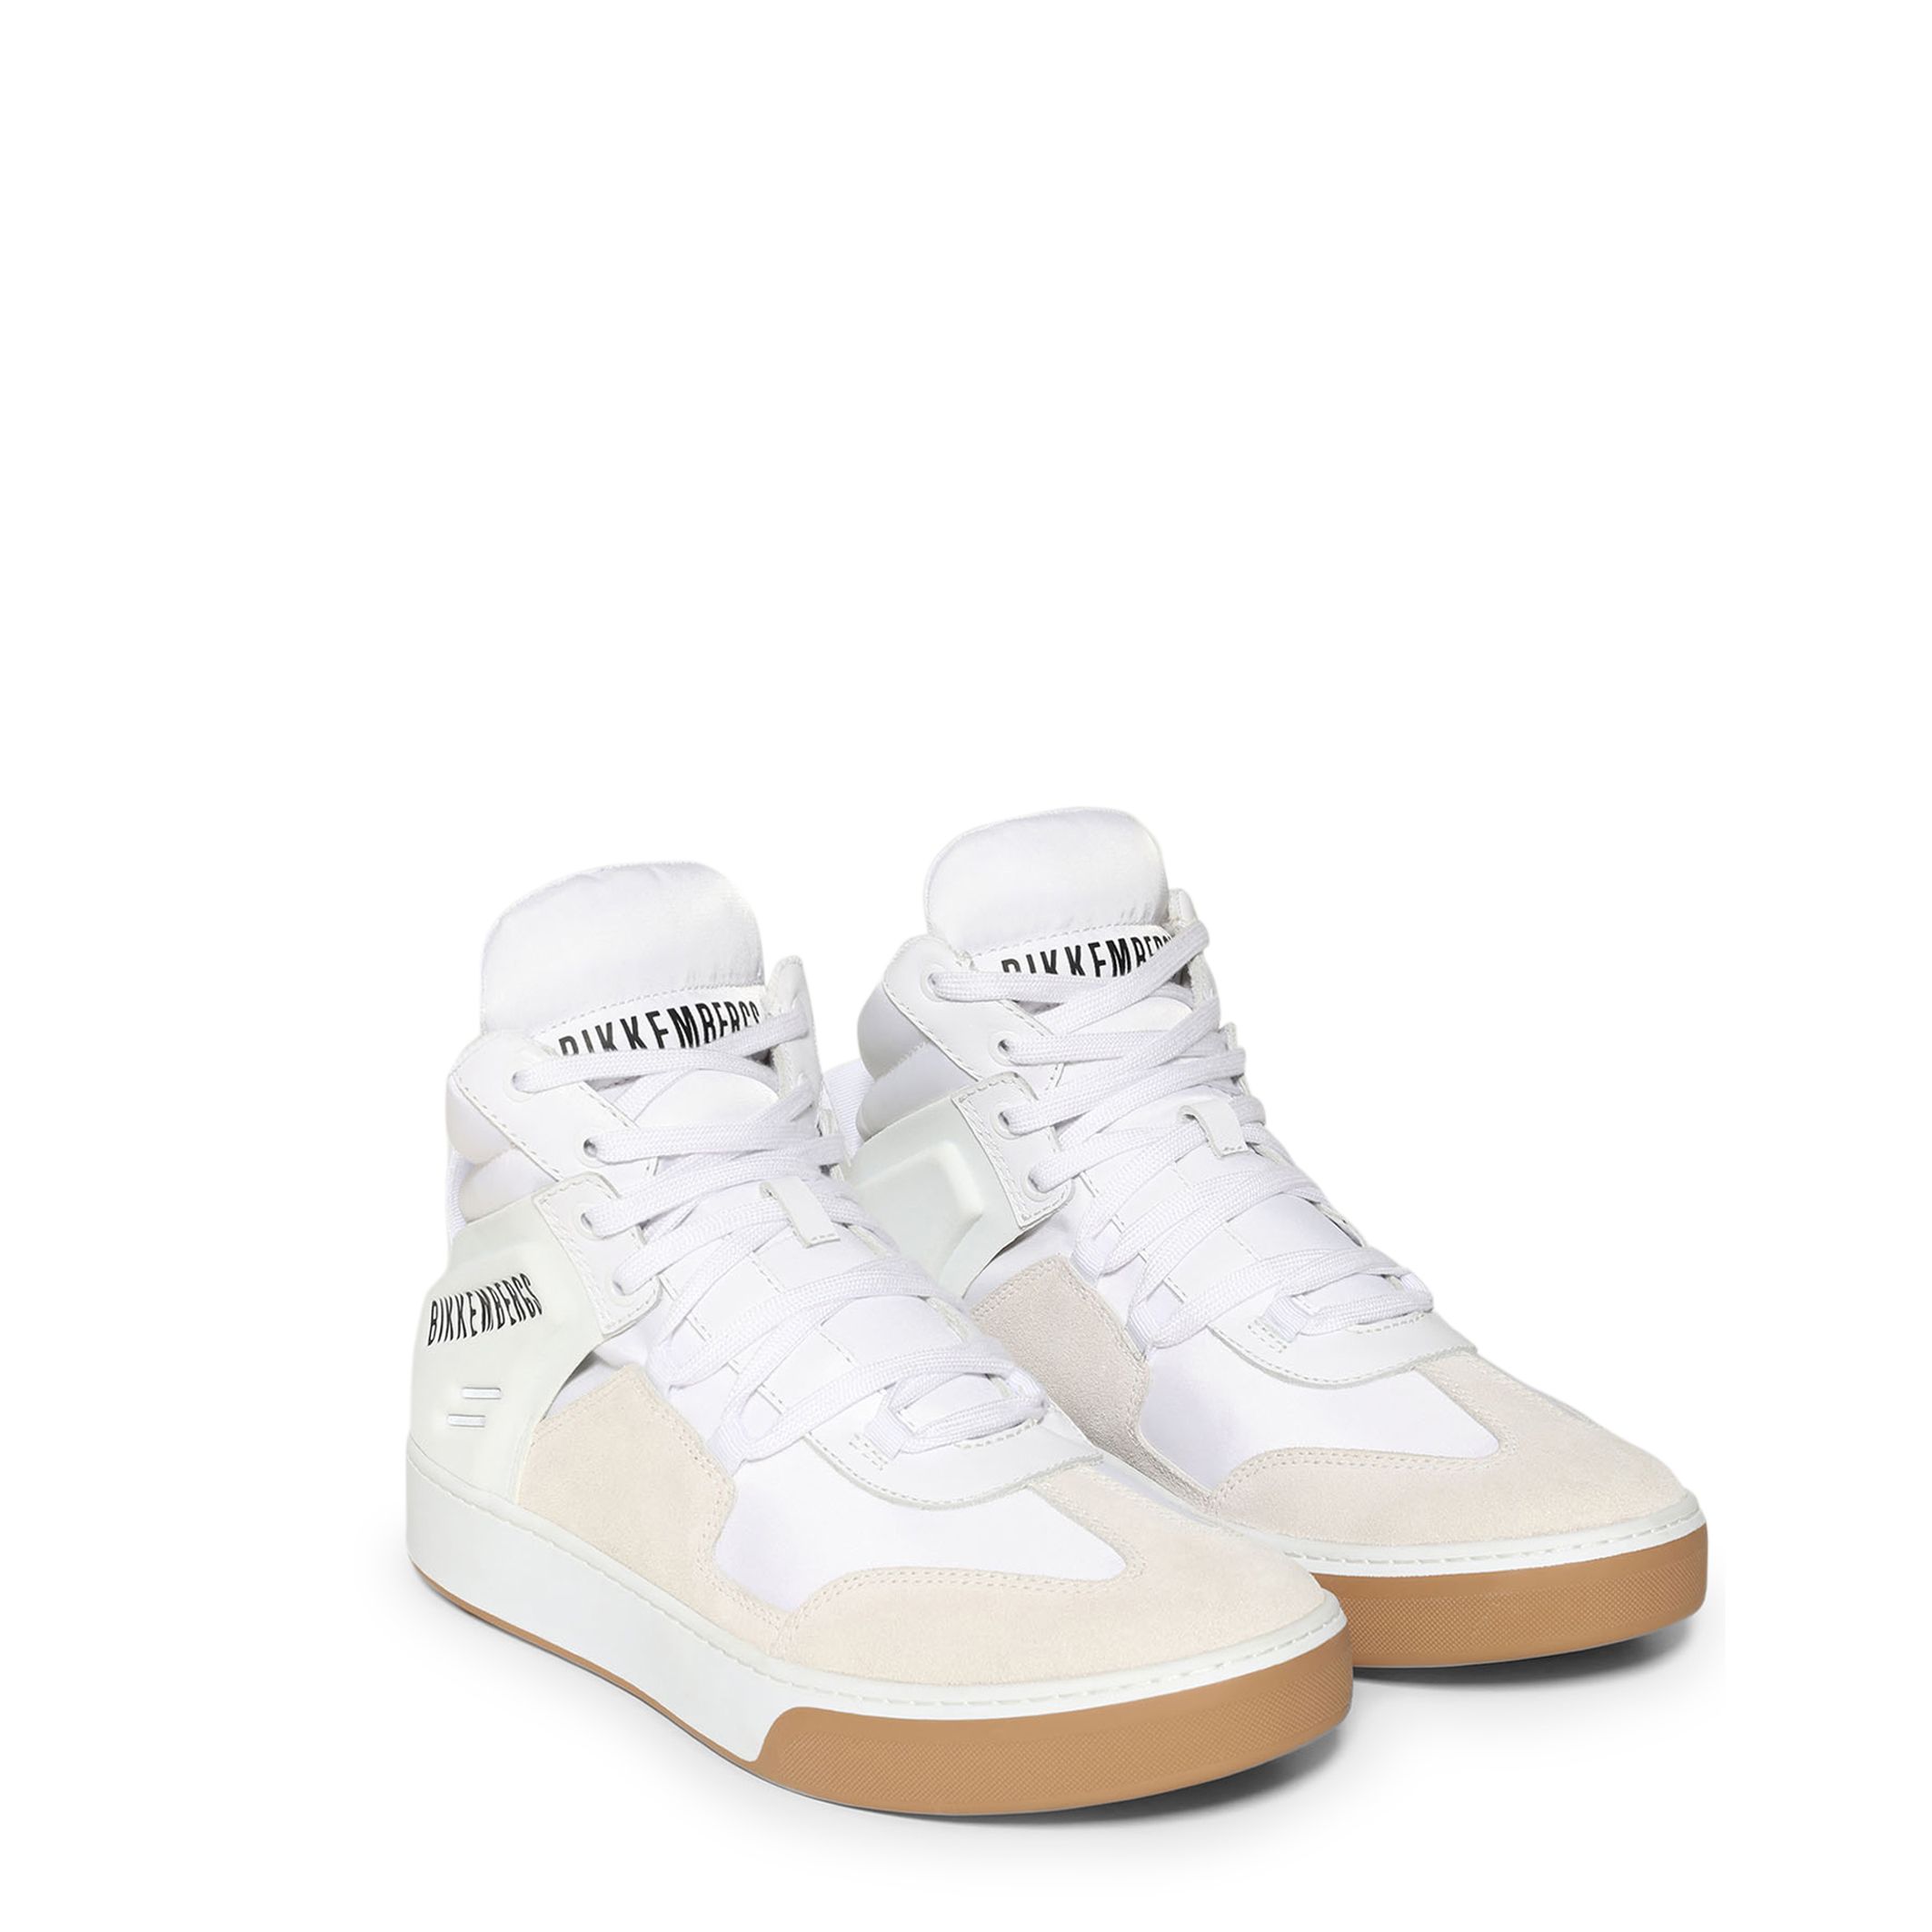 Gender: Man <br> Type: Sneakers <br> Upper: fabric, suede, synthetic leather <br> Insole: synthetic material <br> Internal lining: synthetic material <br> Sole: rubber <br> Details: round toe